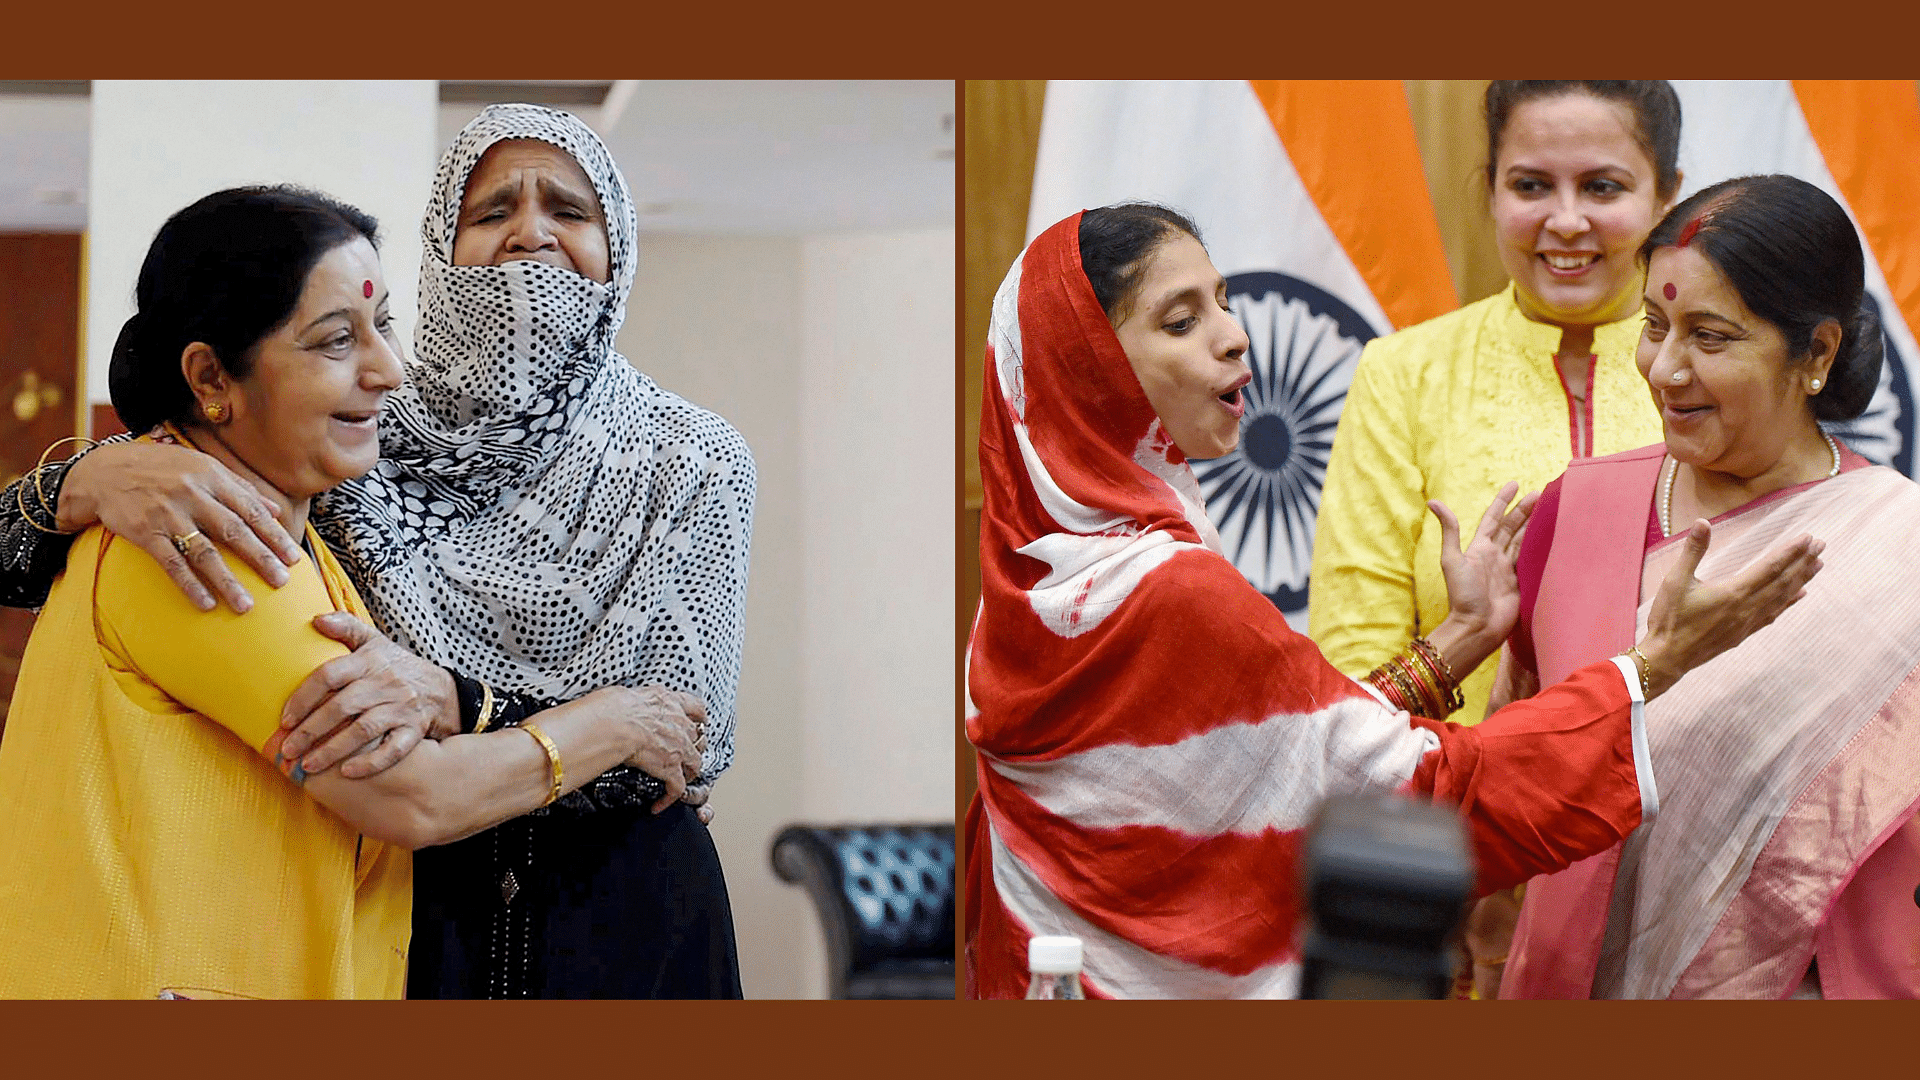 Former External Affairs Minister Sushma Swaraj had helped Uzma and Geeta return to their home in India.